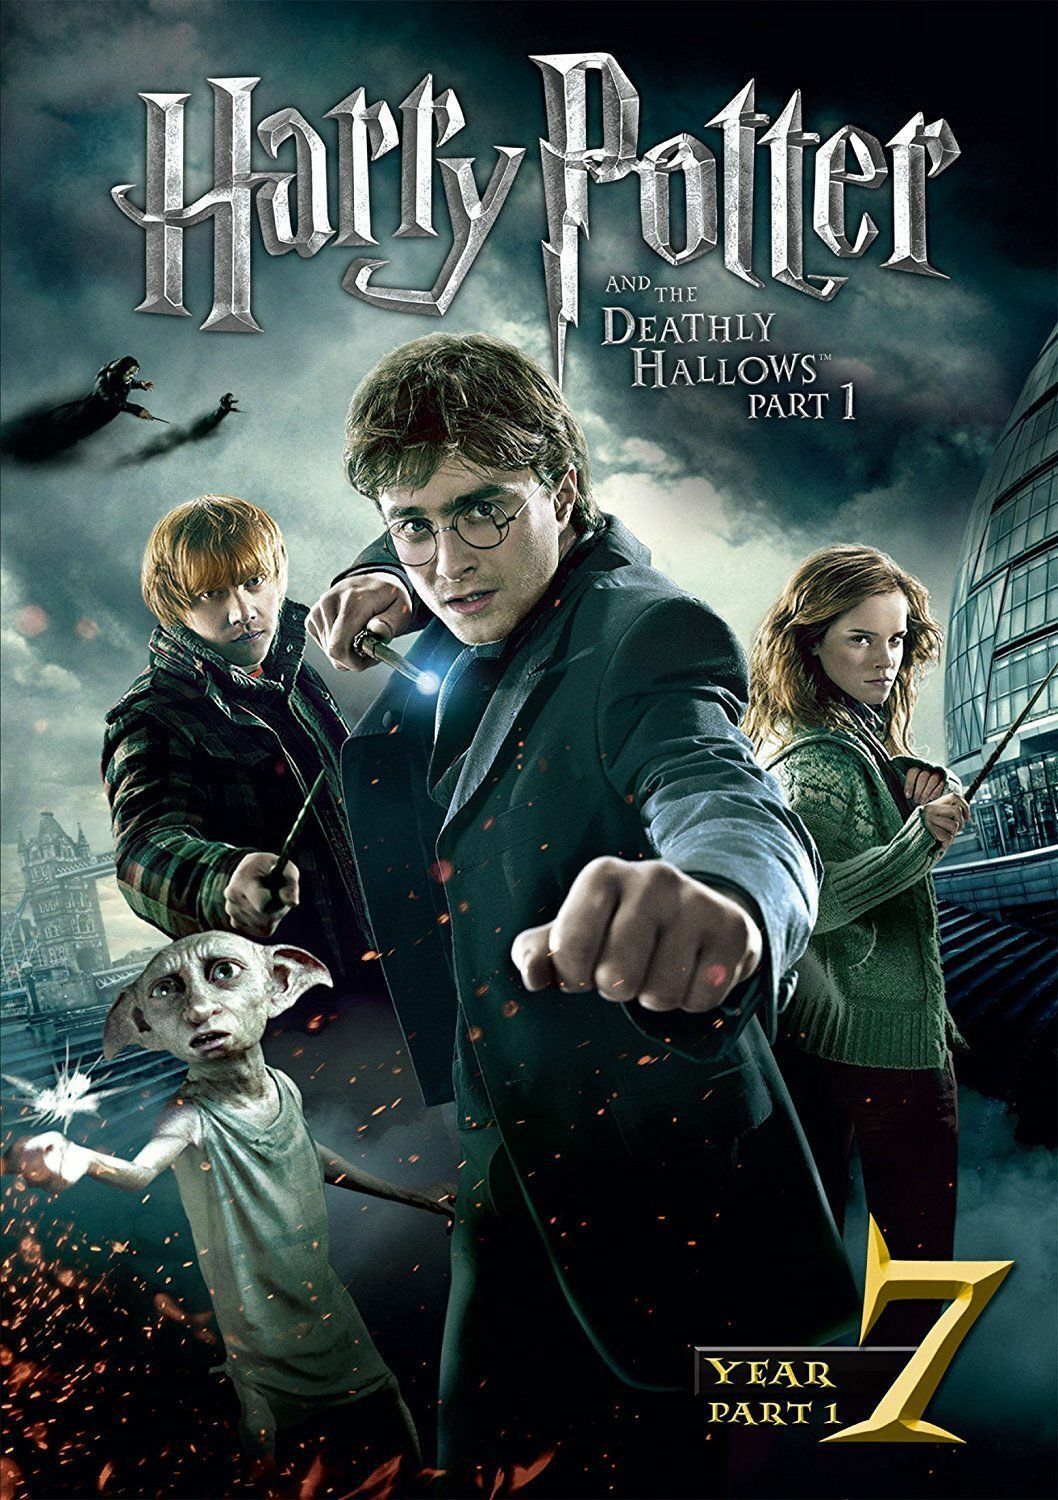 Harry Potter and the Deathly Hallow Part 1